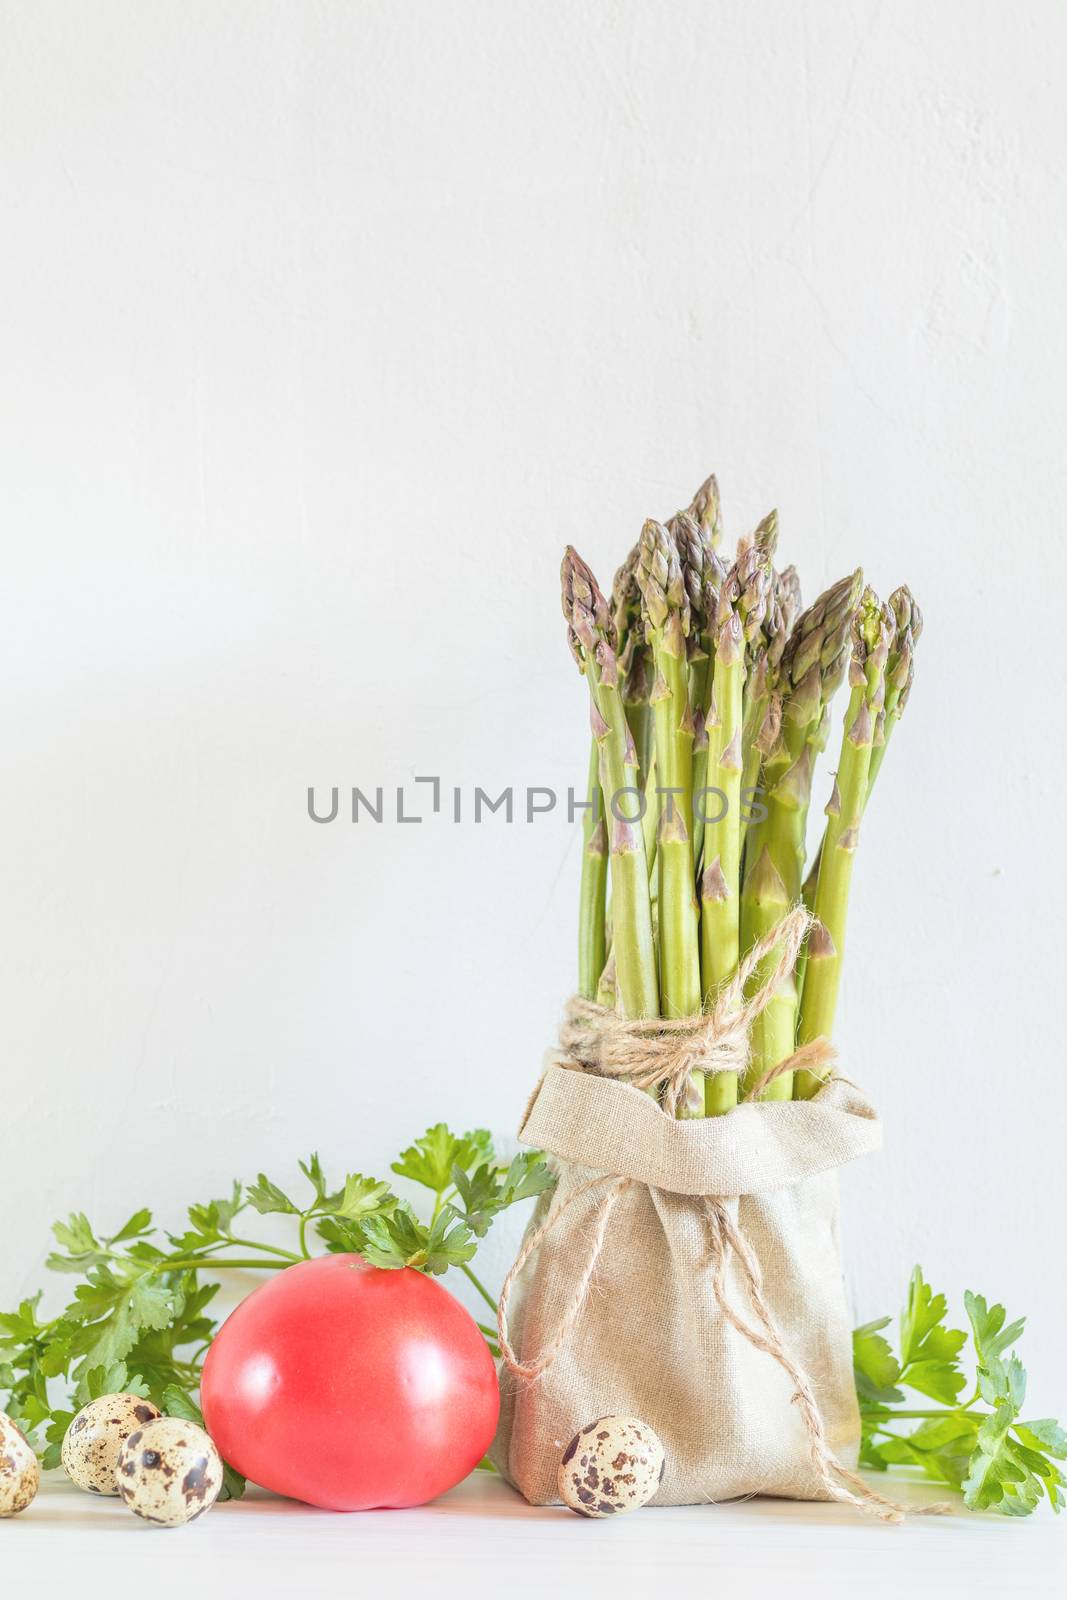 Bunches of fresh asparagus in a little sack, vegetables and quail eggs on the white cracked wall background. Copy space